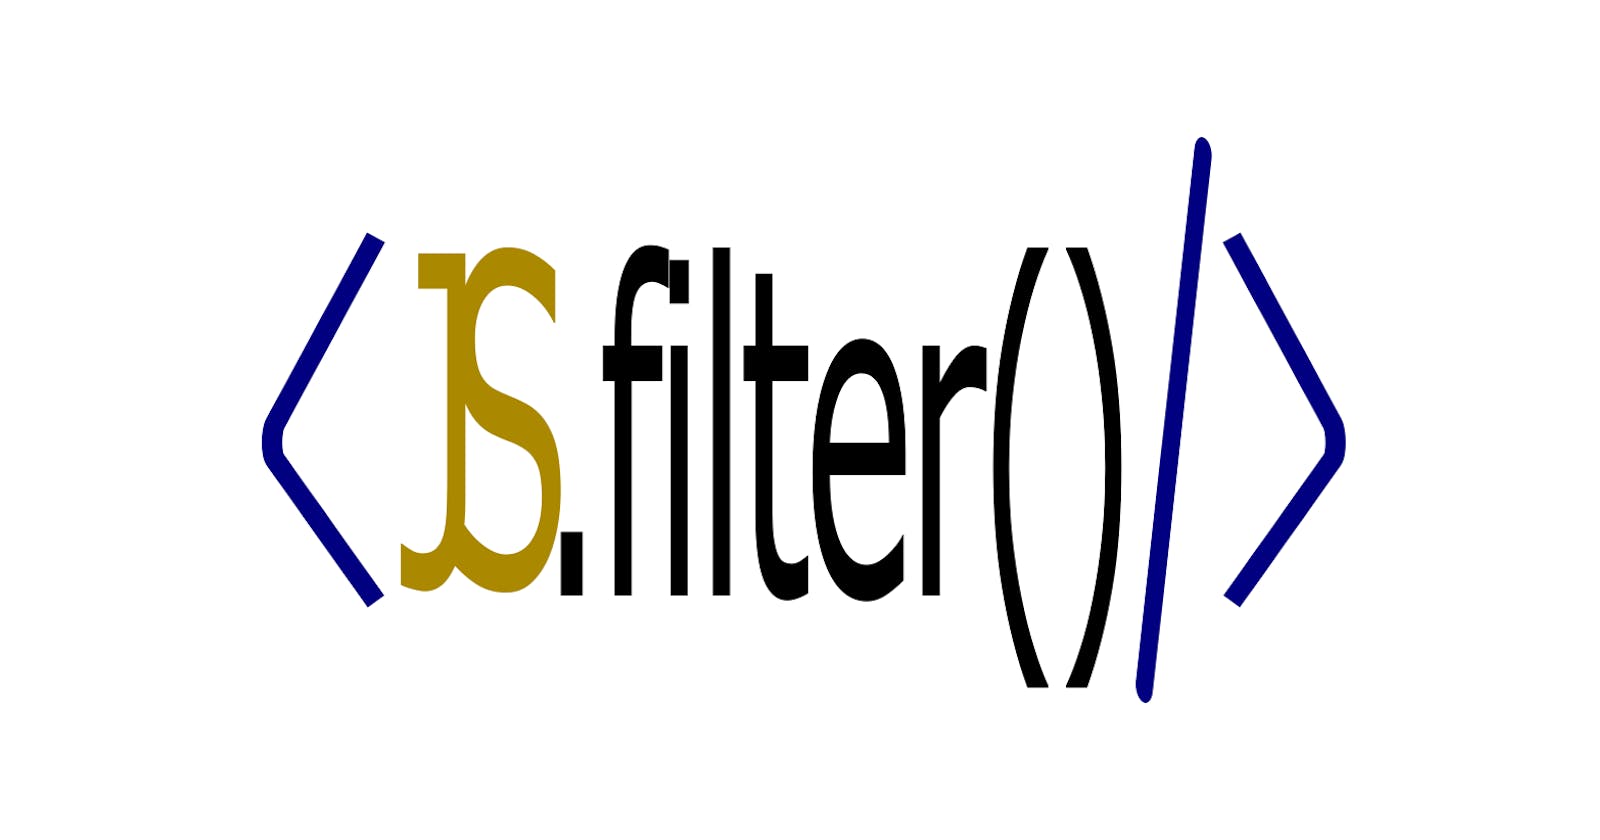 The method filter